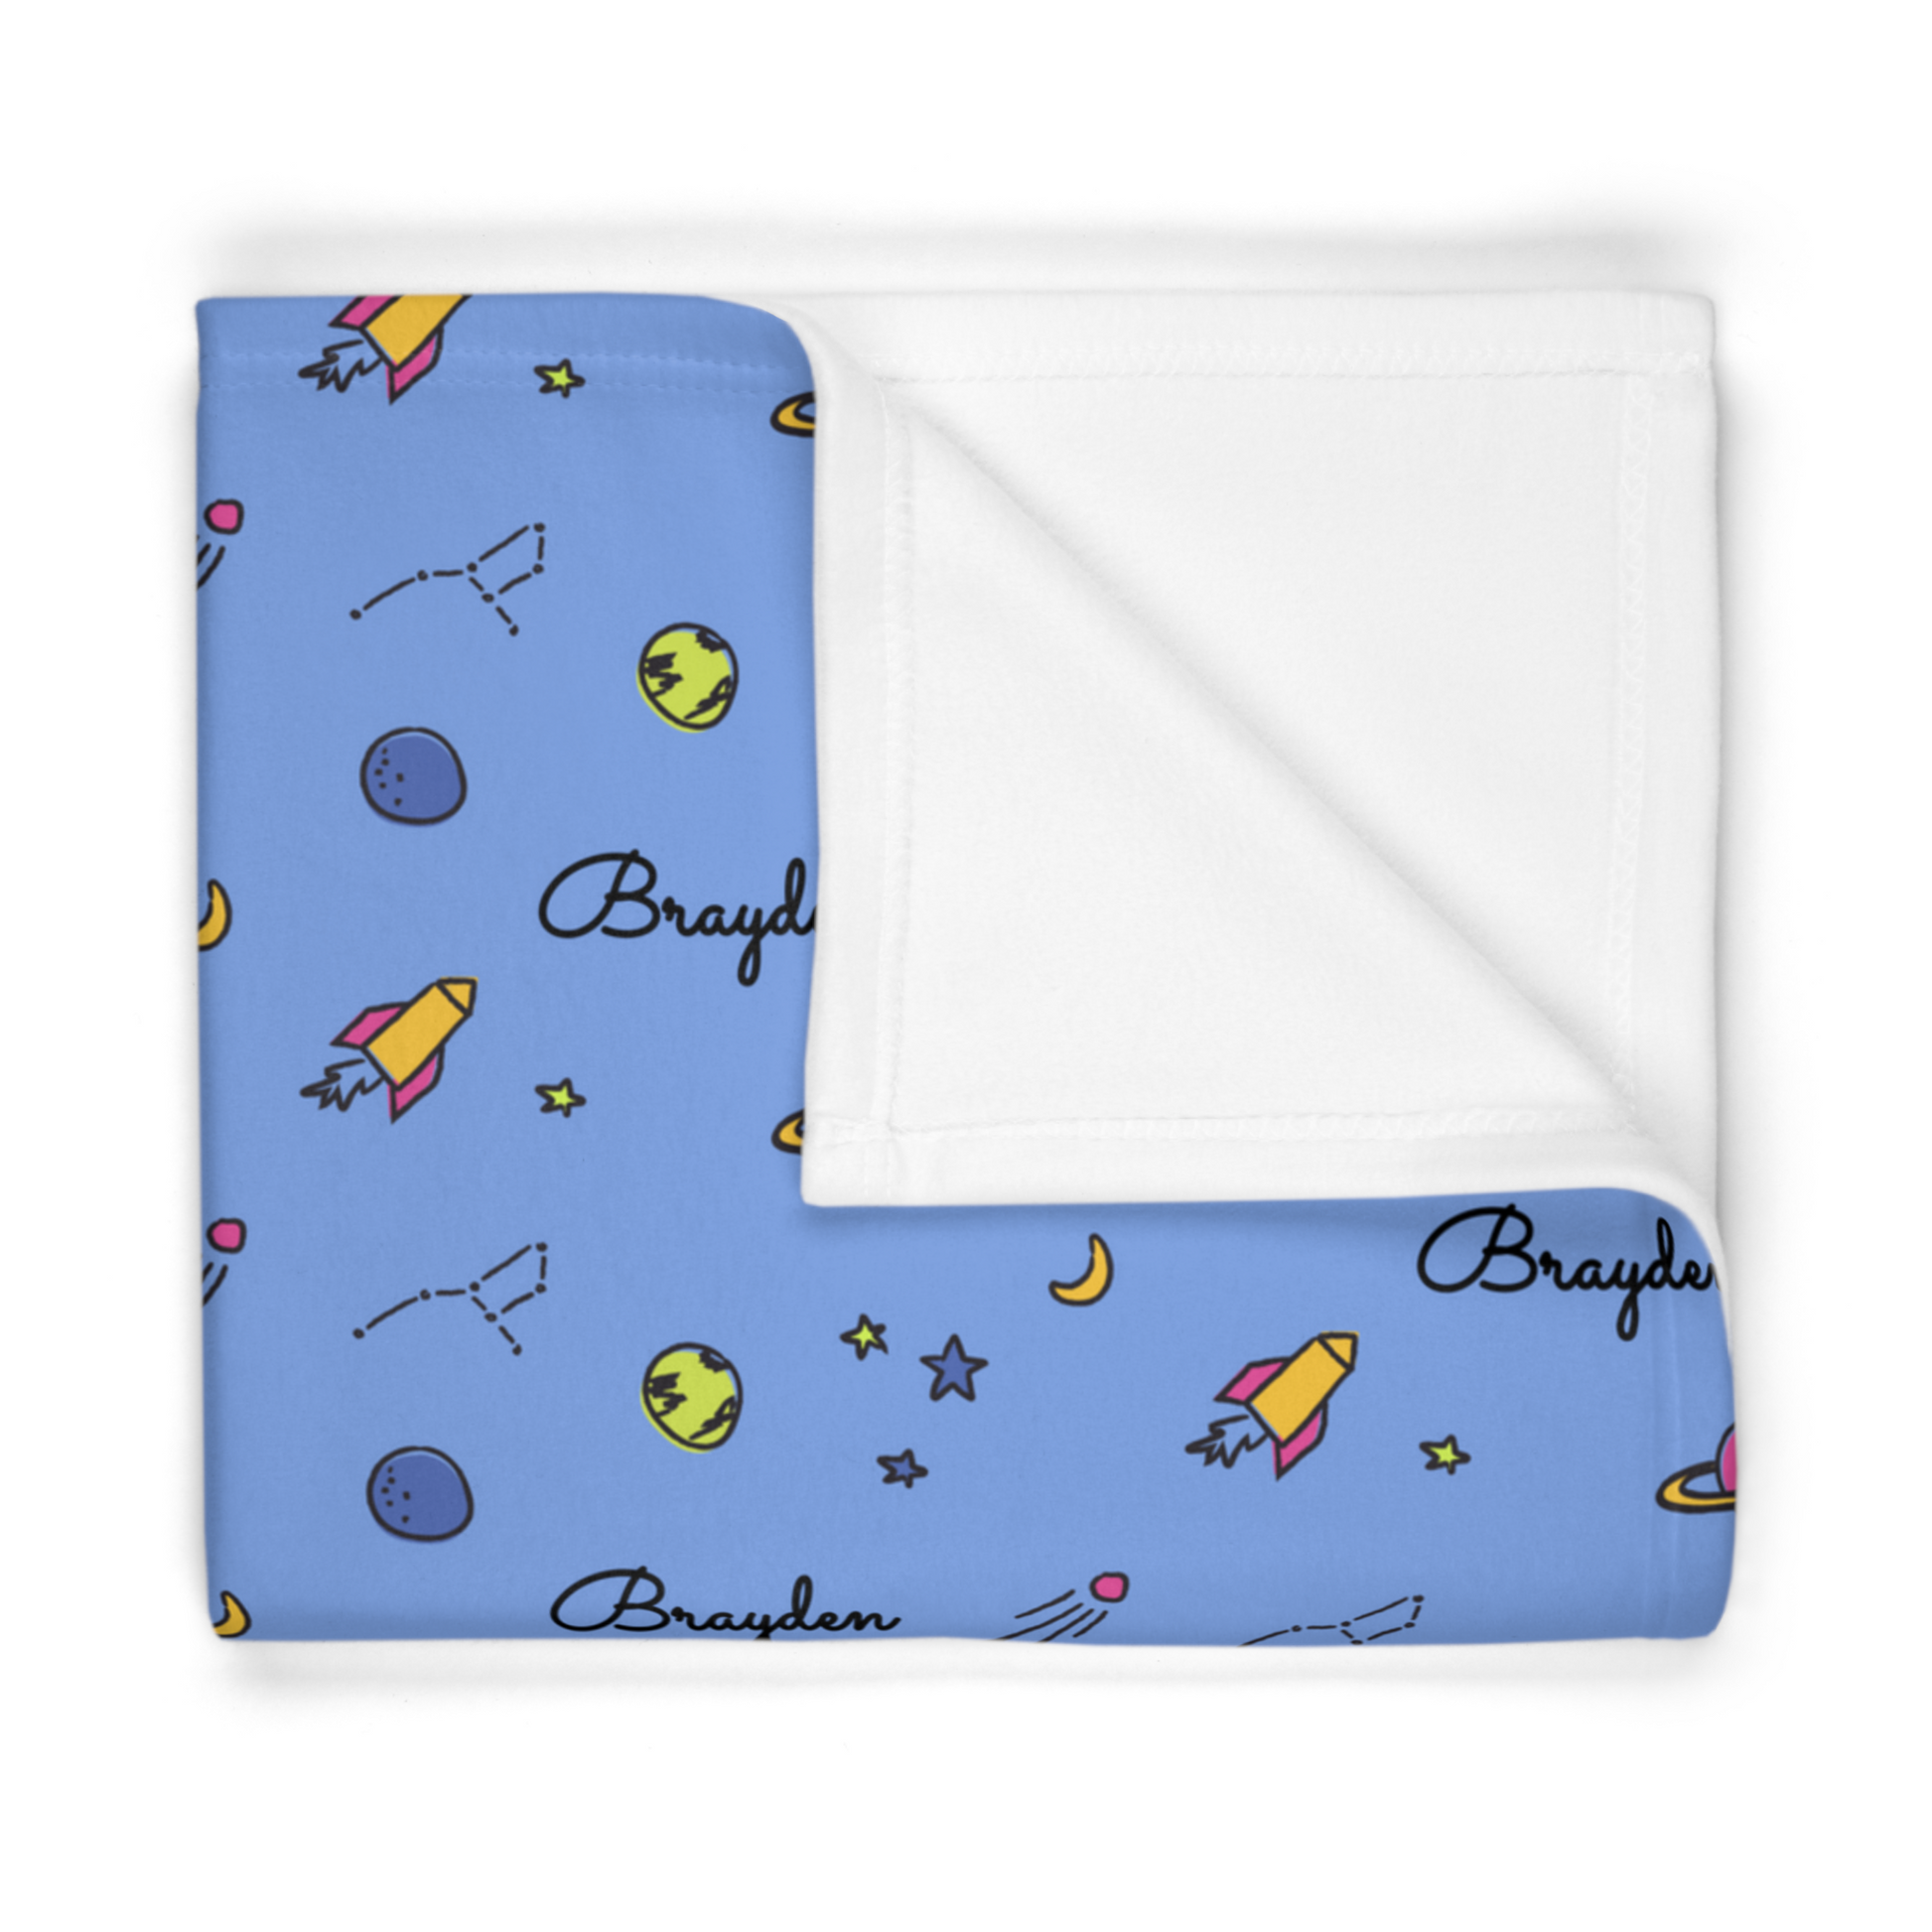 Folded fleece fabric personalized baby blanket in space, rocket and stars pattern